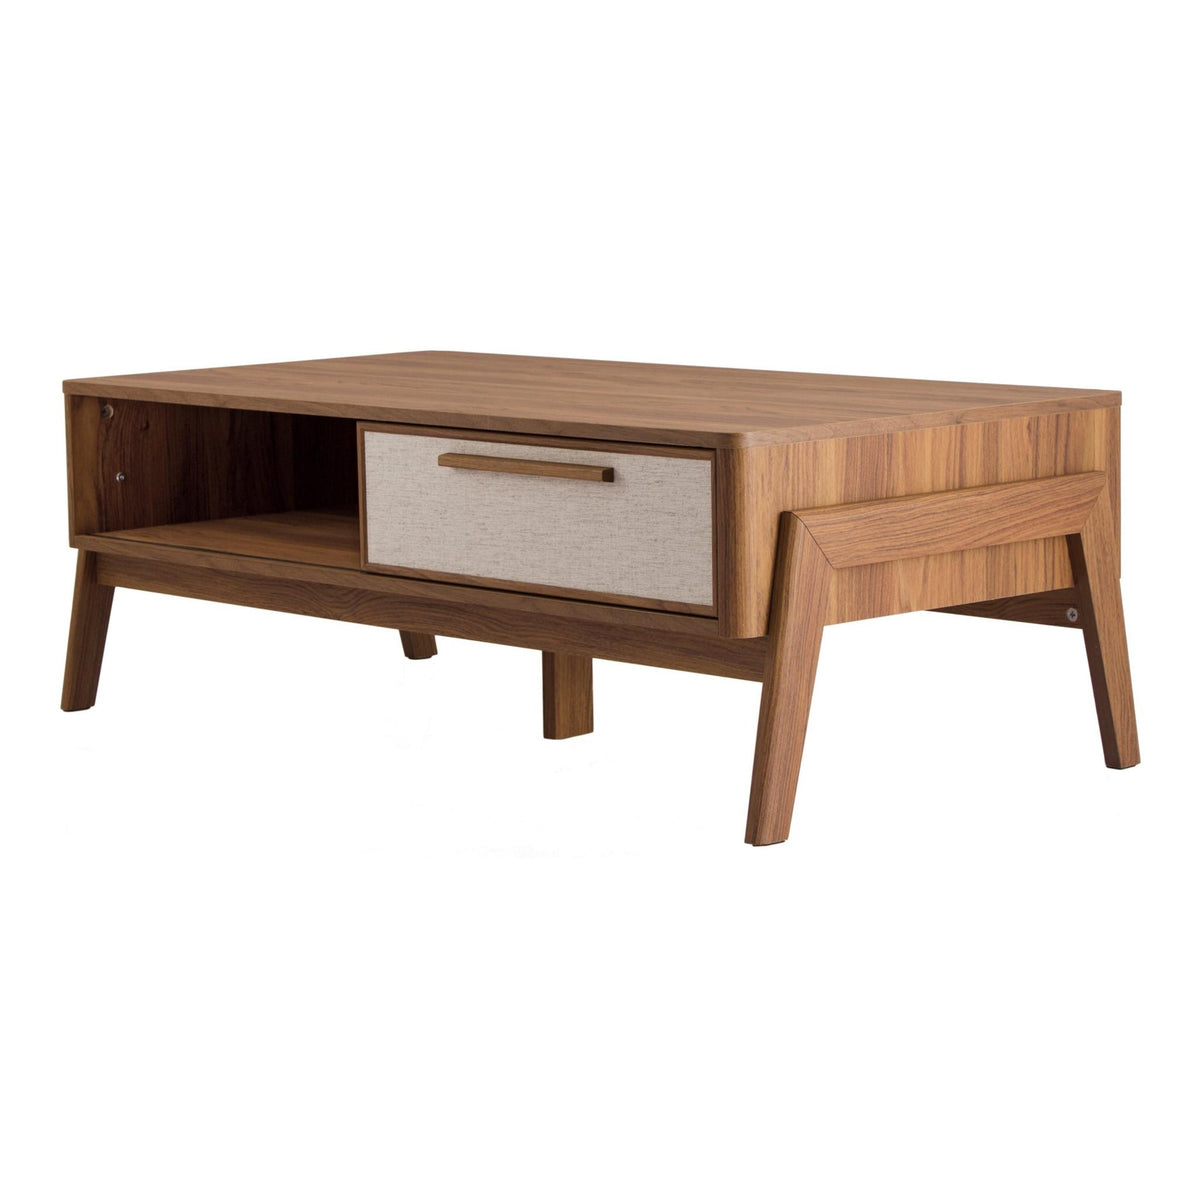 Heaton Coffee Table by New Pacific Direct - 1340009